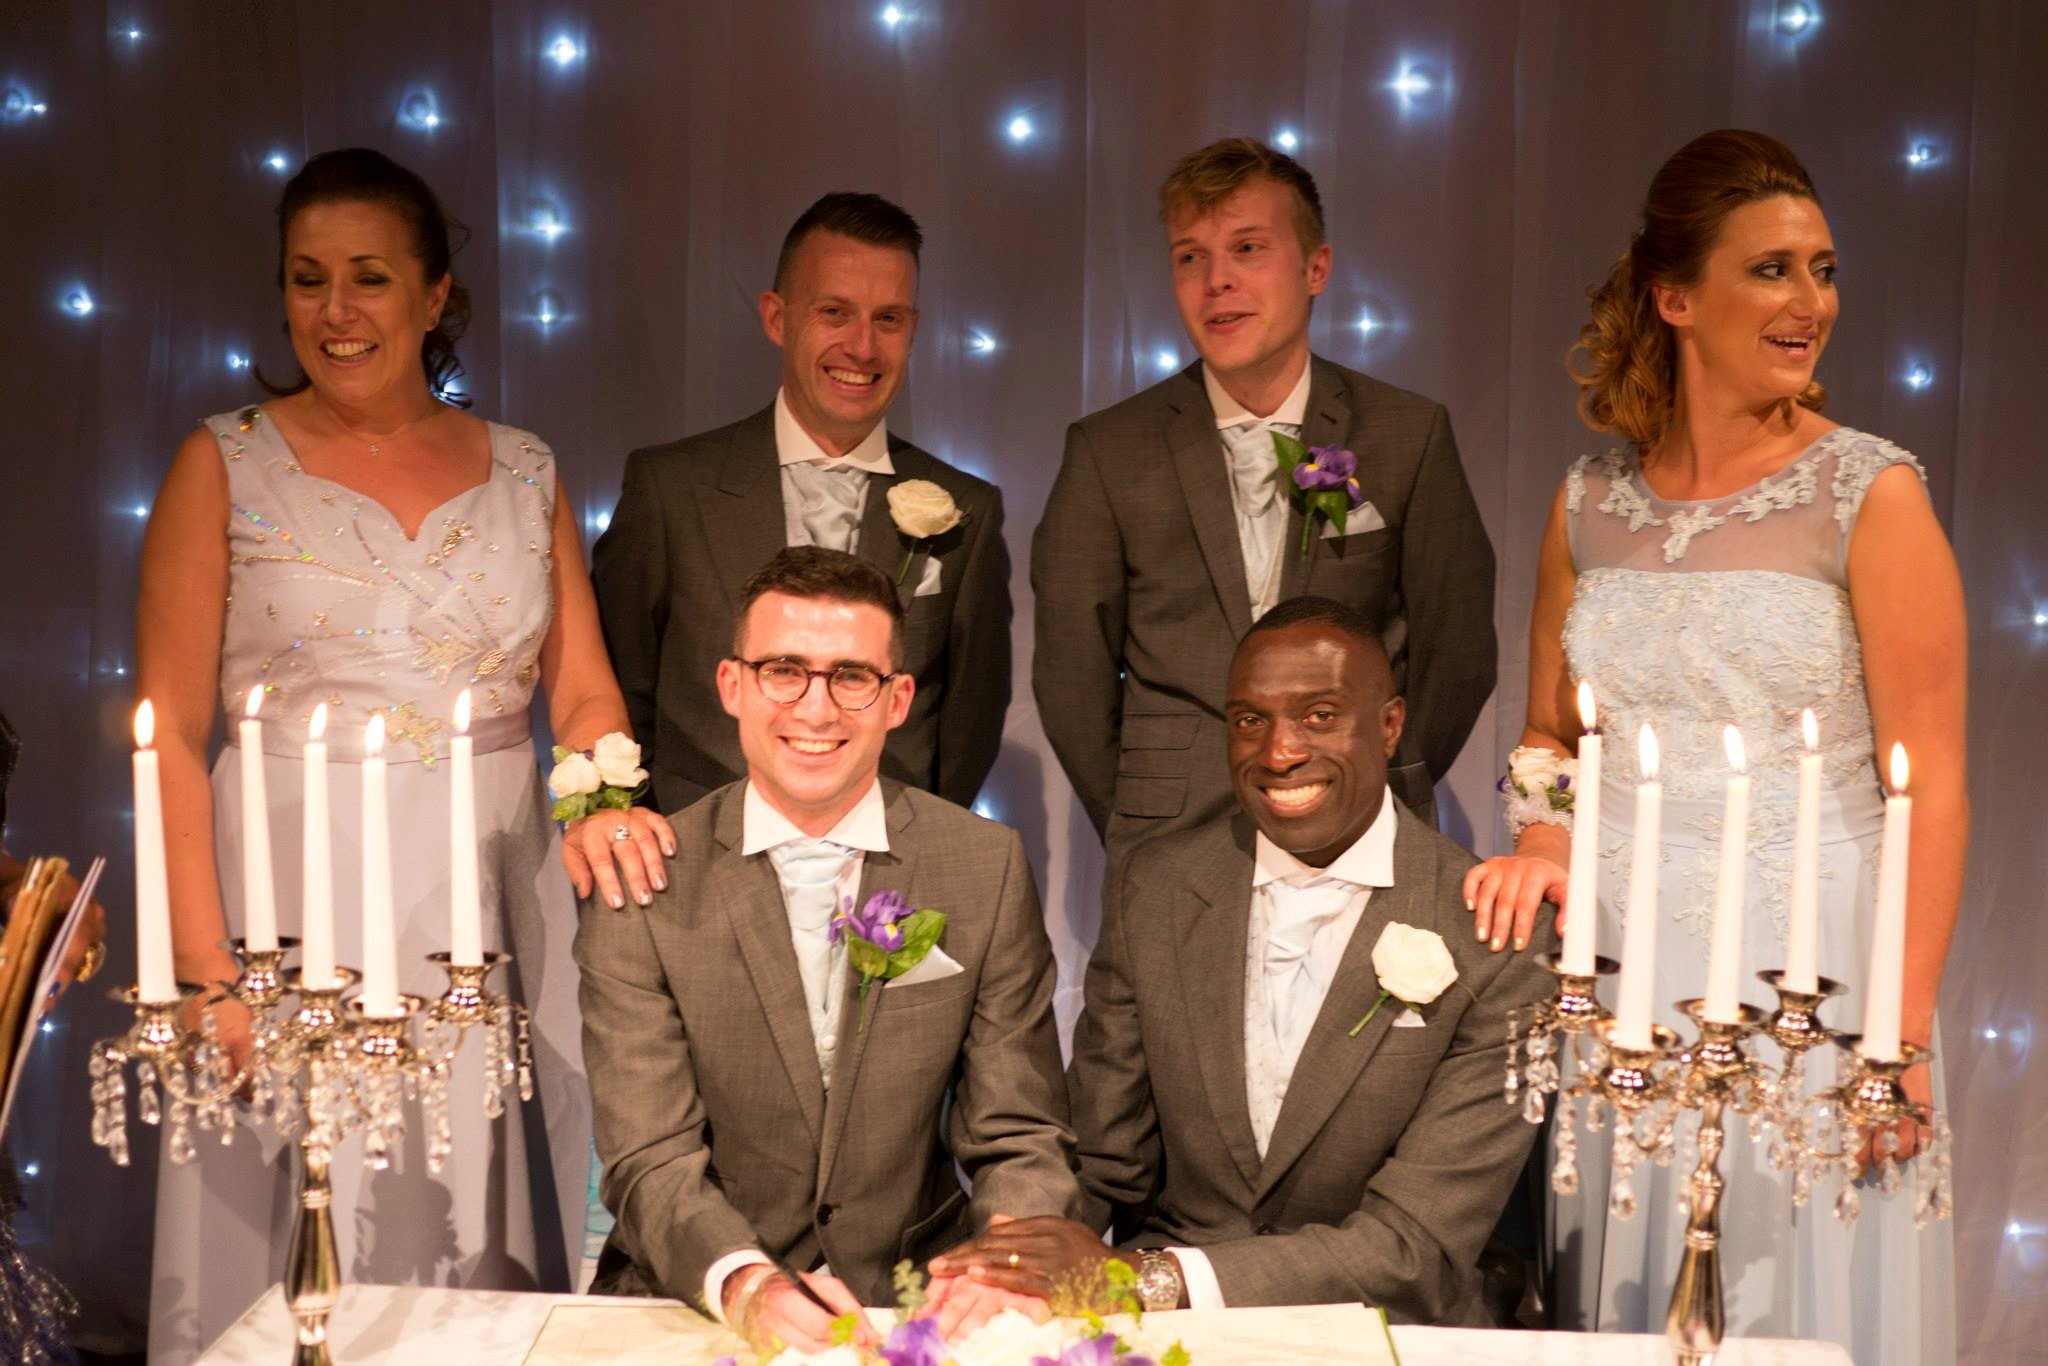 Same-sex couple pictured with their friends and family